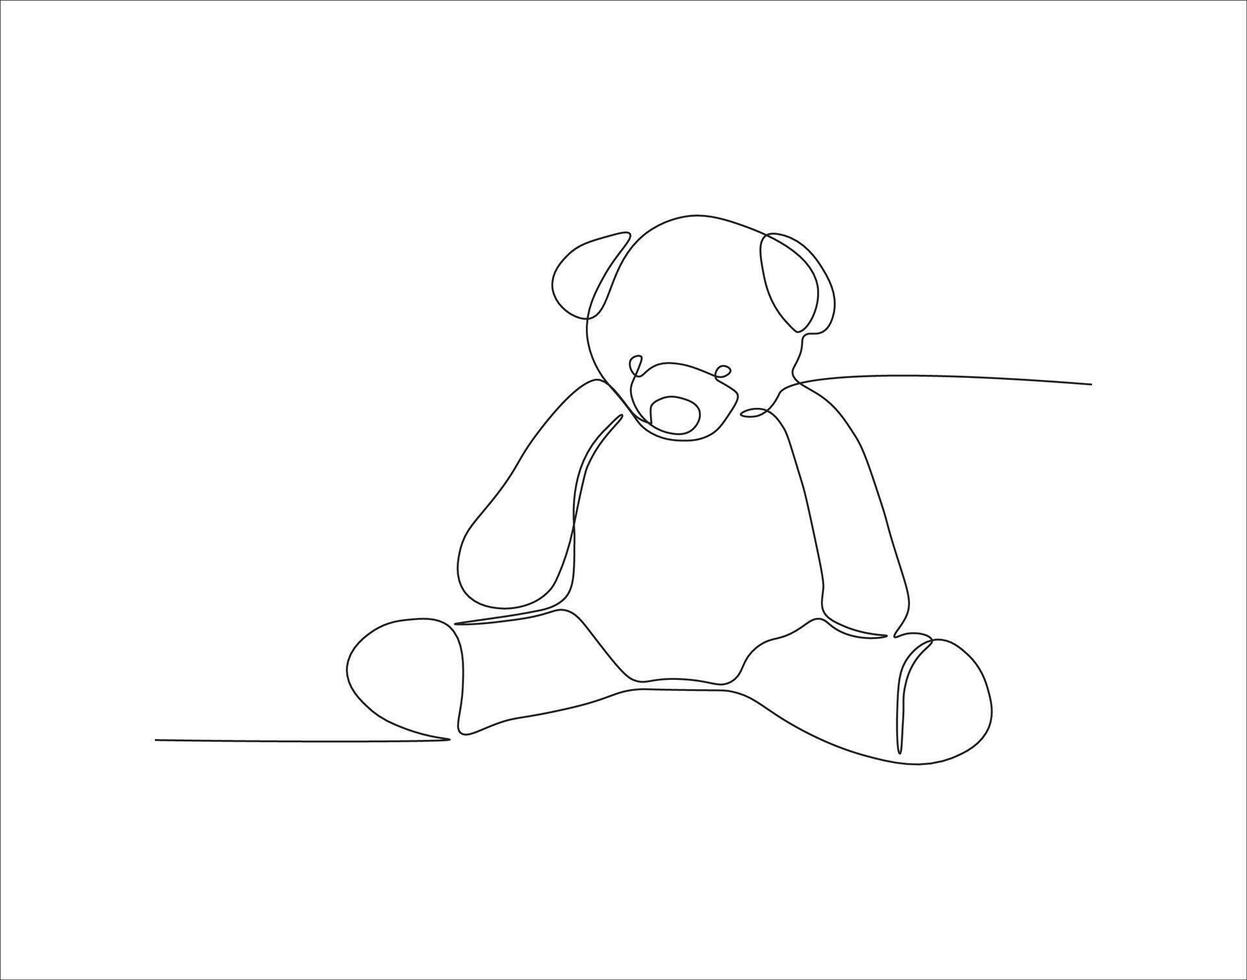 Continuous Line Drawing Of Teddy Bear. One Line Of Teddy Bear. Doll Continuous Line Art. Editable Outline. vector